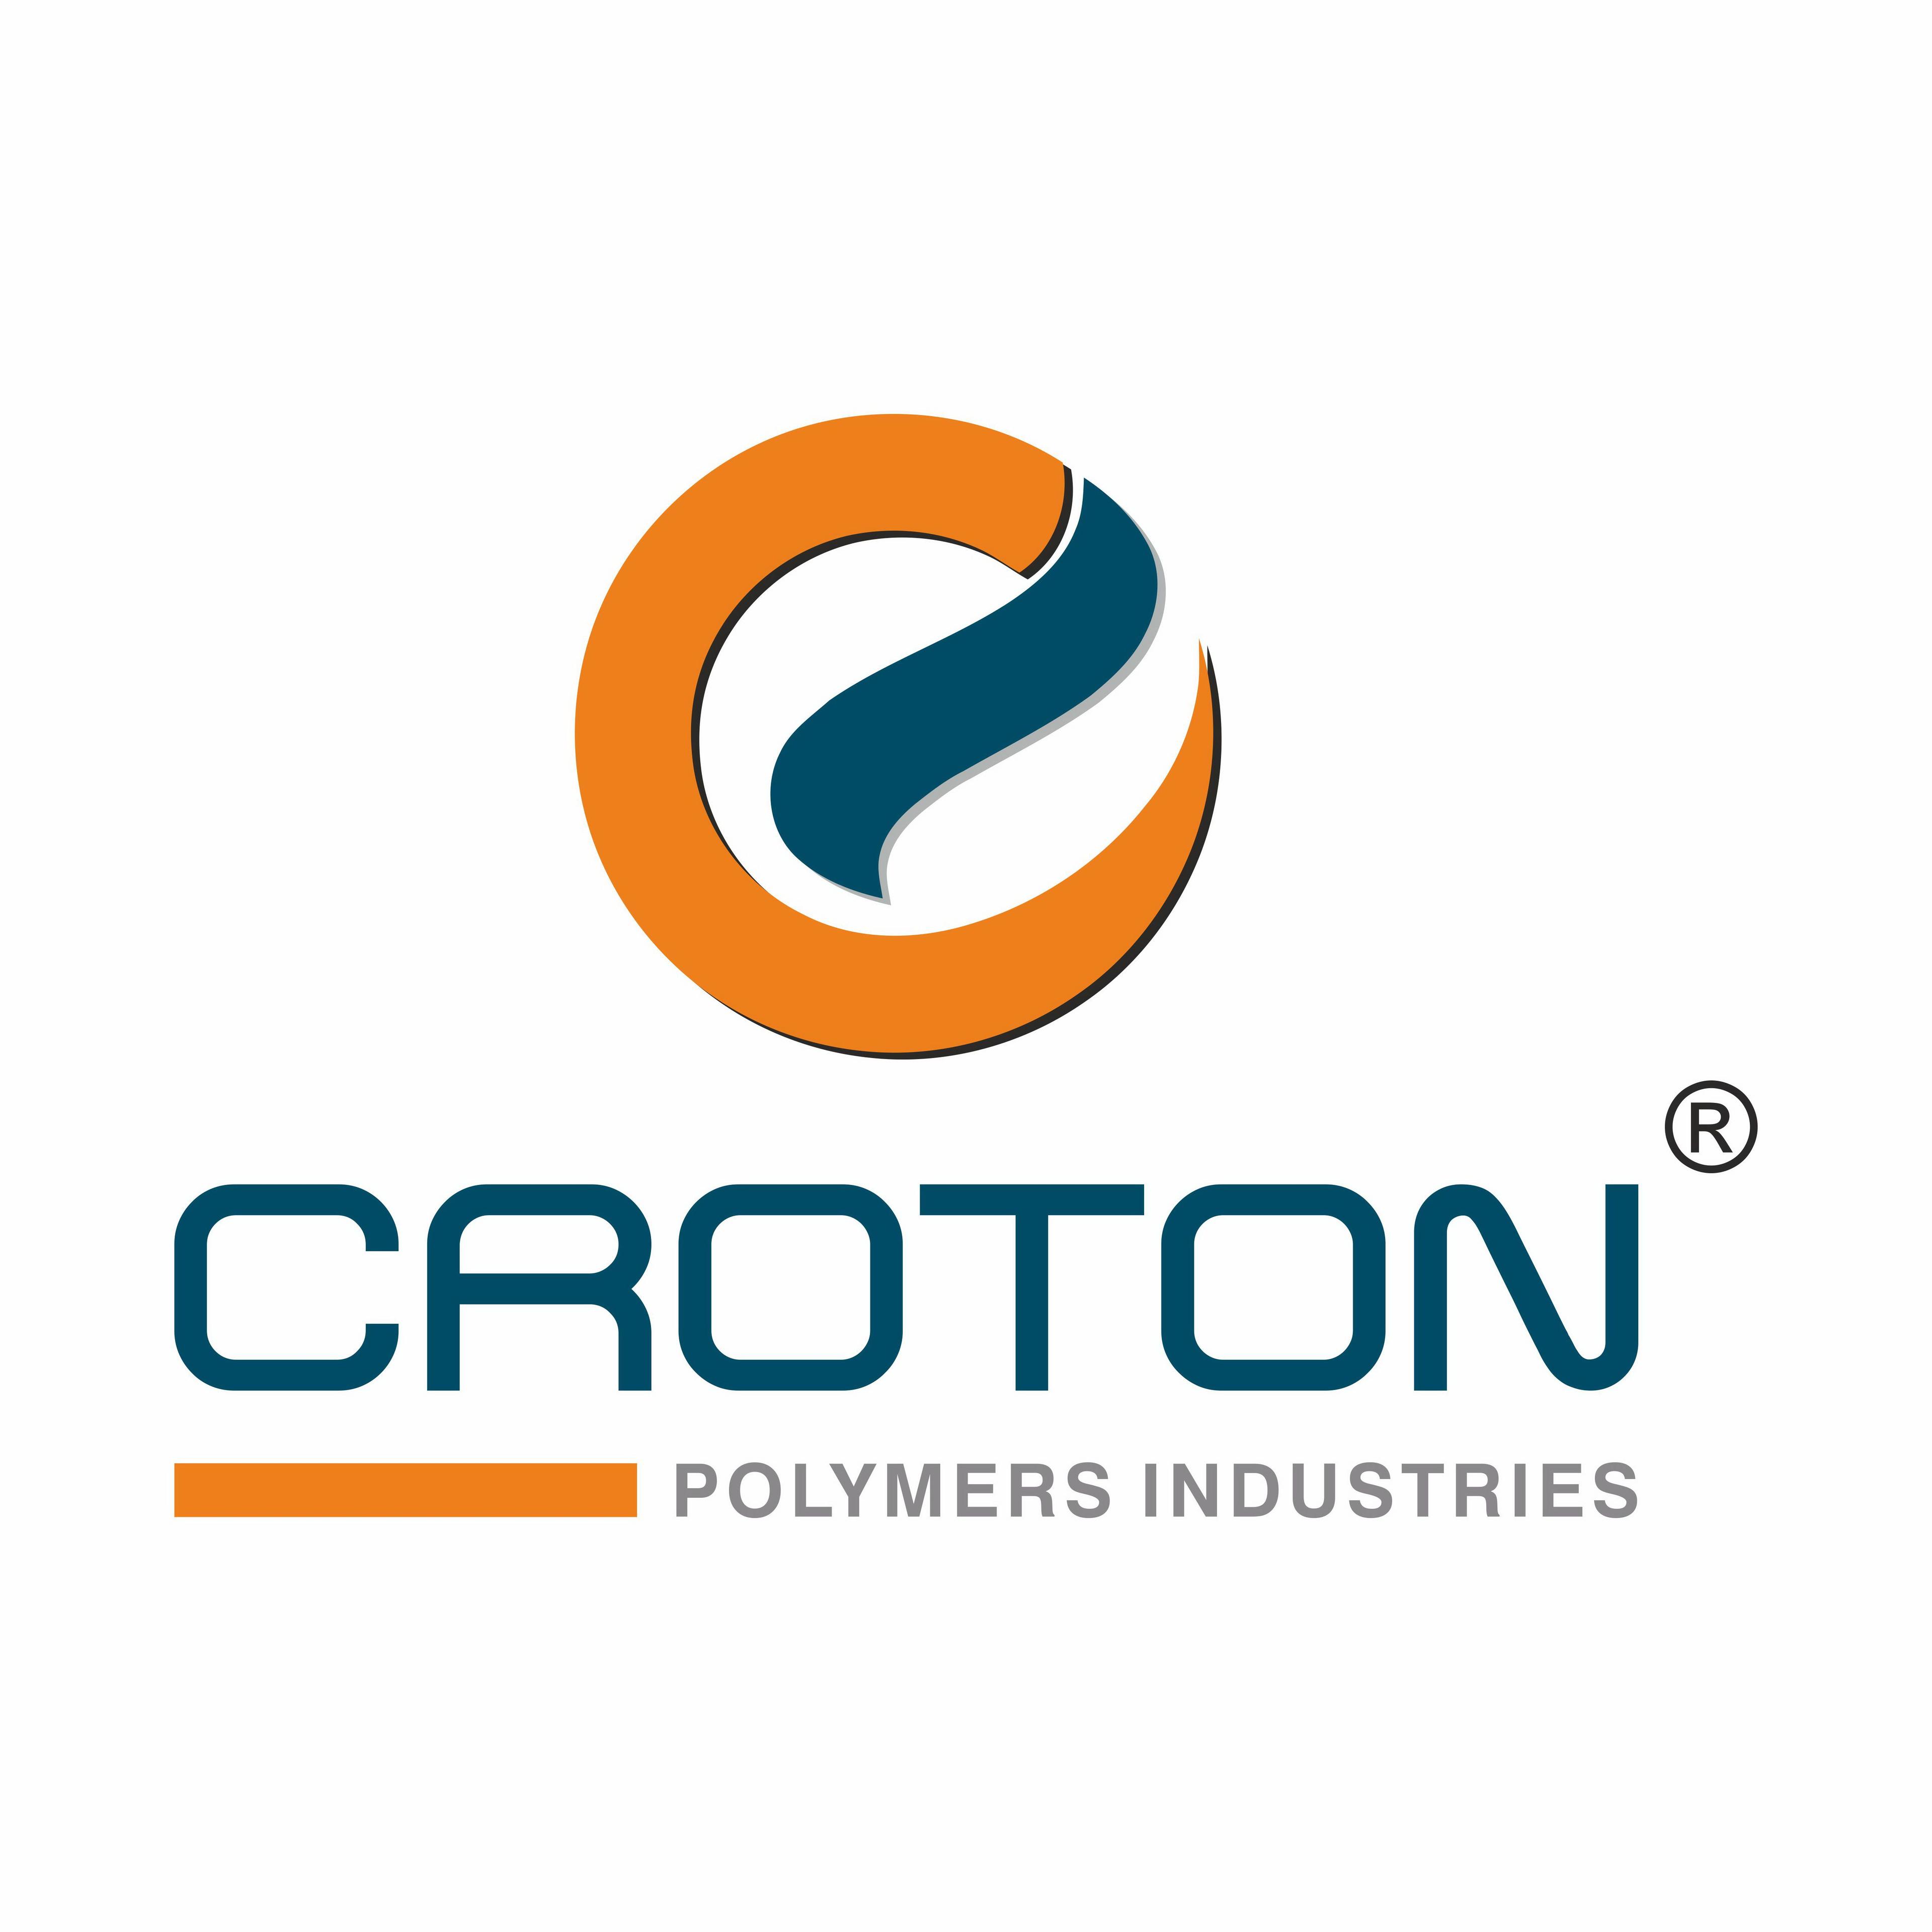 CROTON POLYMERS INDUSTRIES